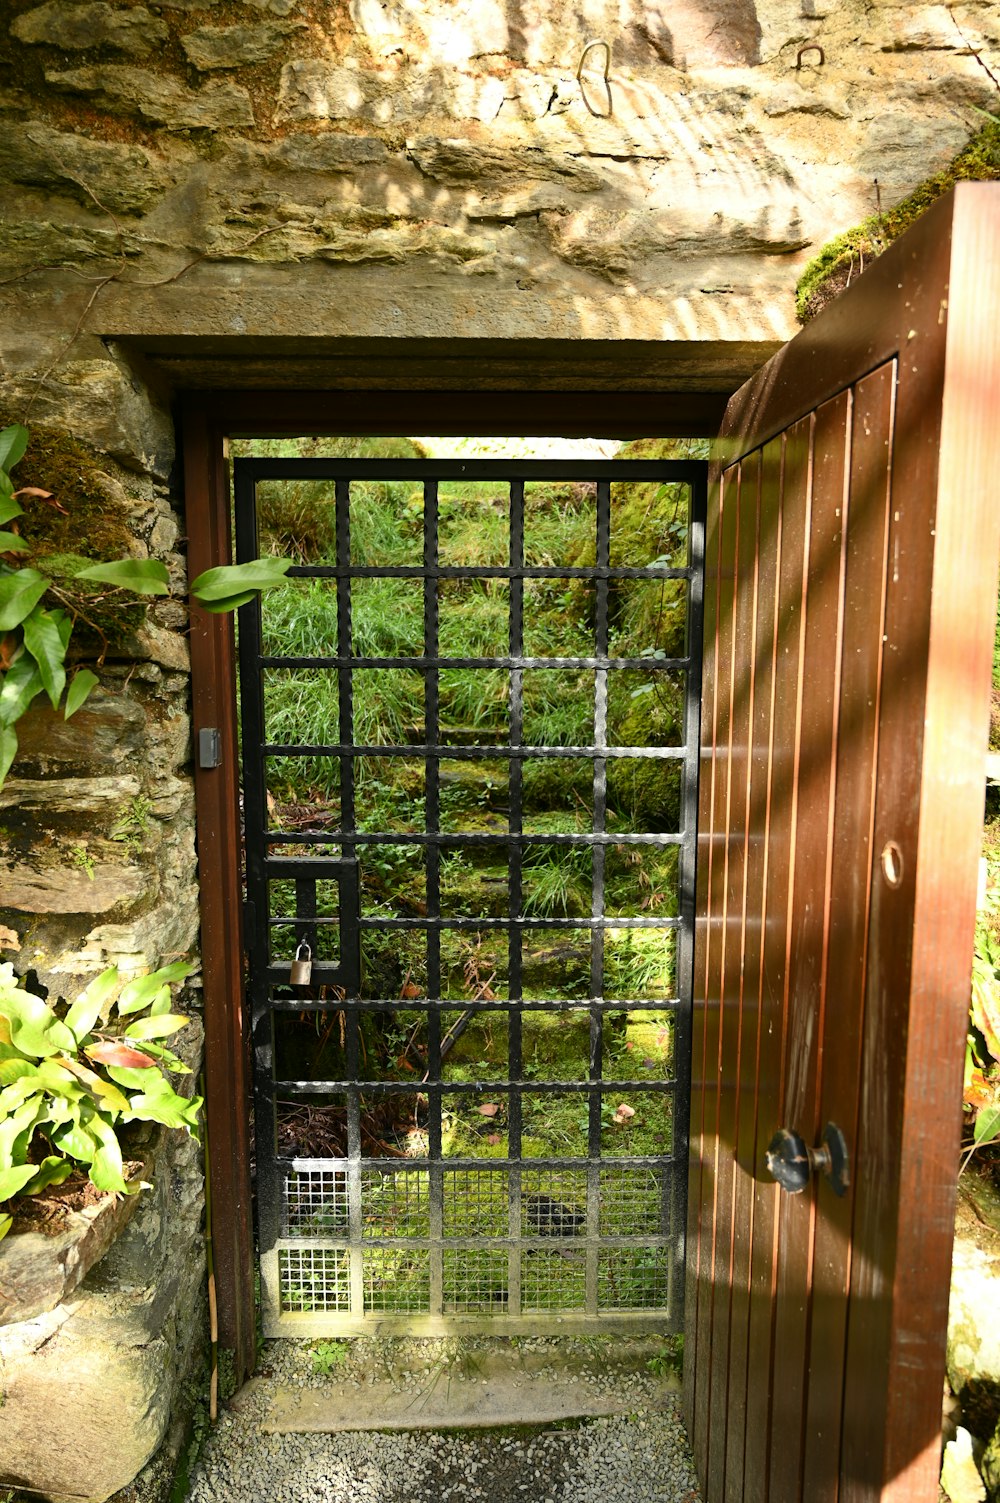 a gated entrance to a stone building with a cat in it